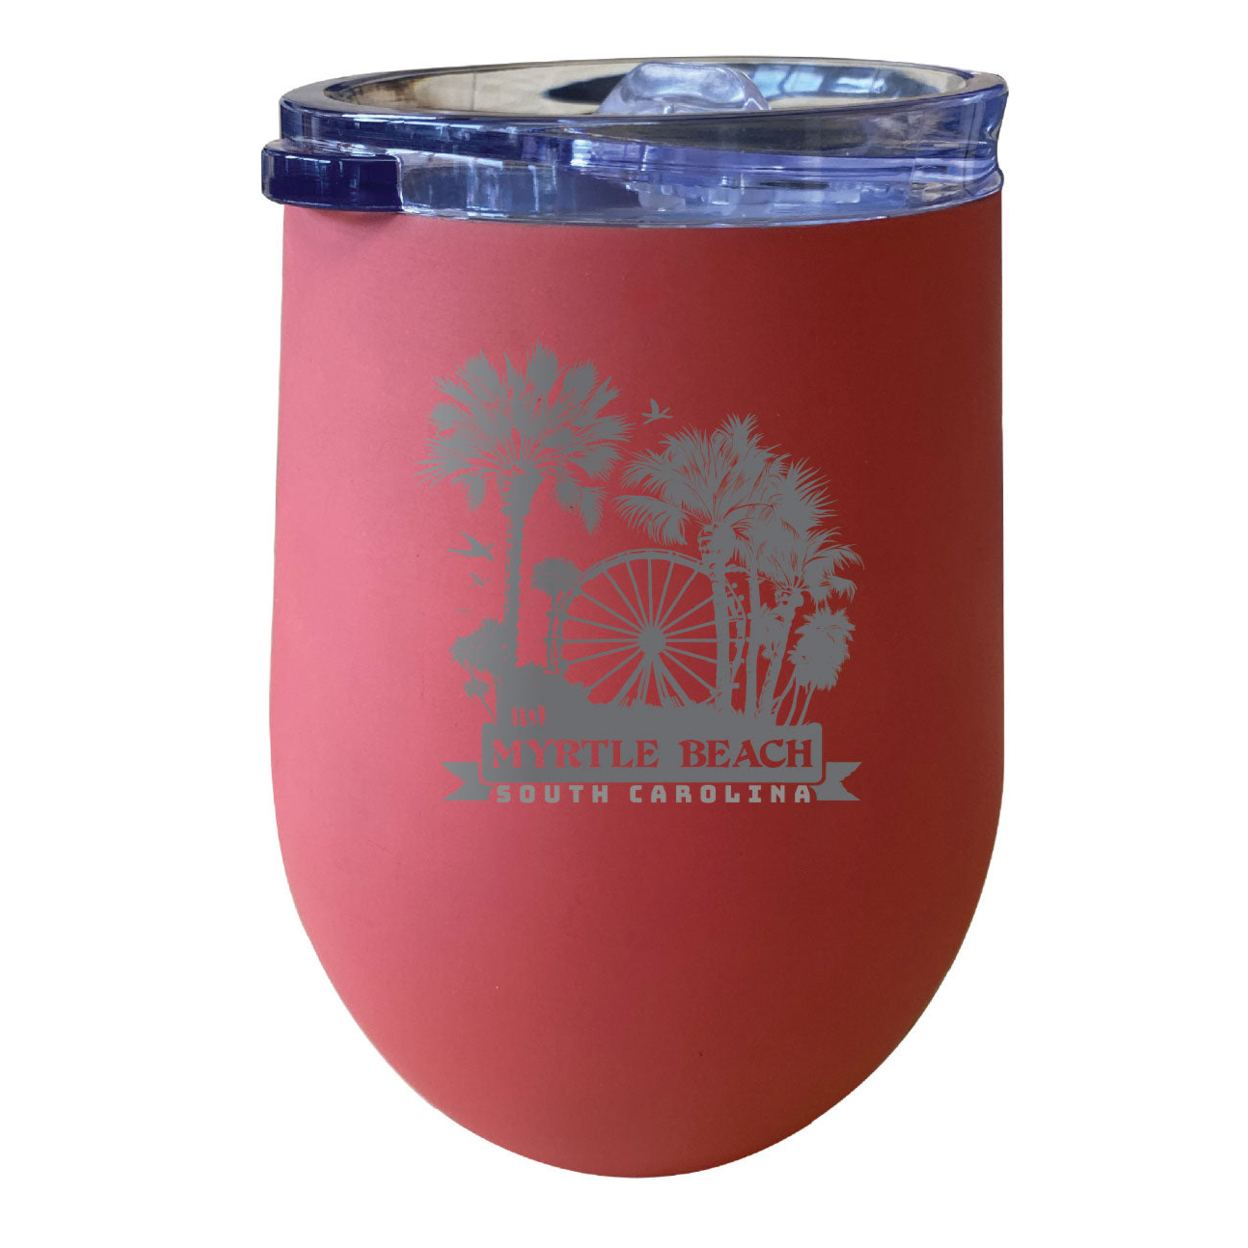 Myrtle Beach South Carolina Laser Etched Souvenir 12 Oz Insulated Wine Stainless Steel Tumbler - Seafoam